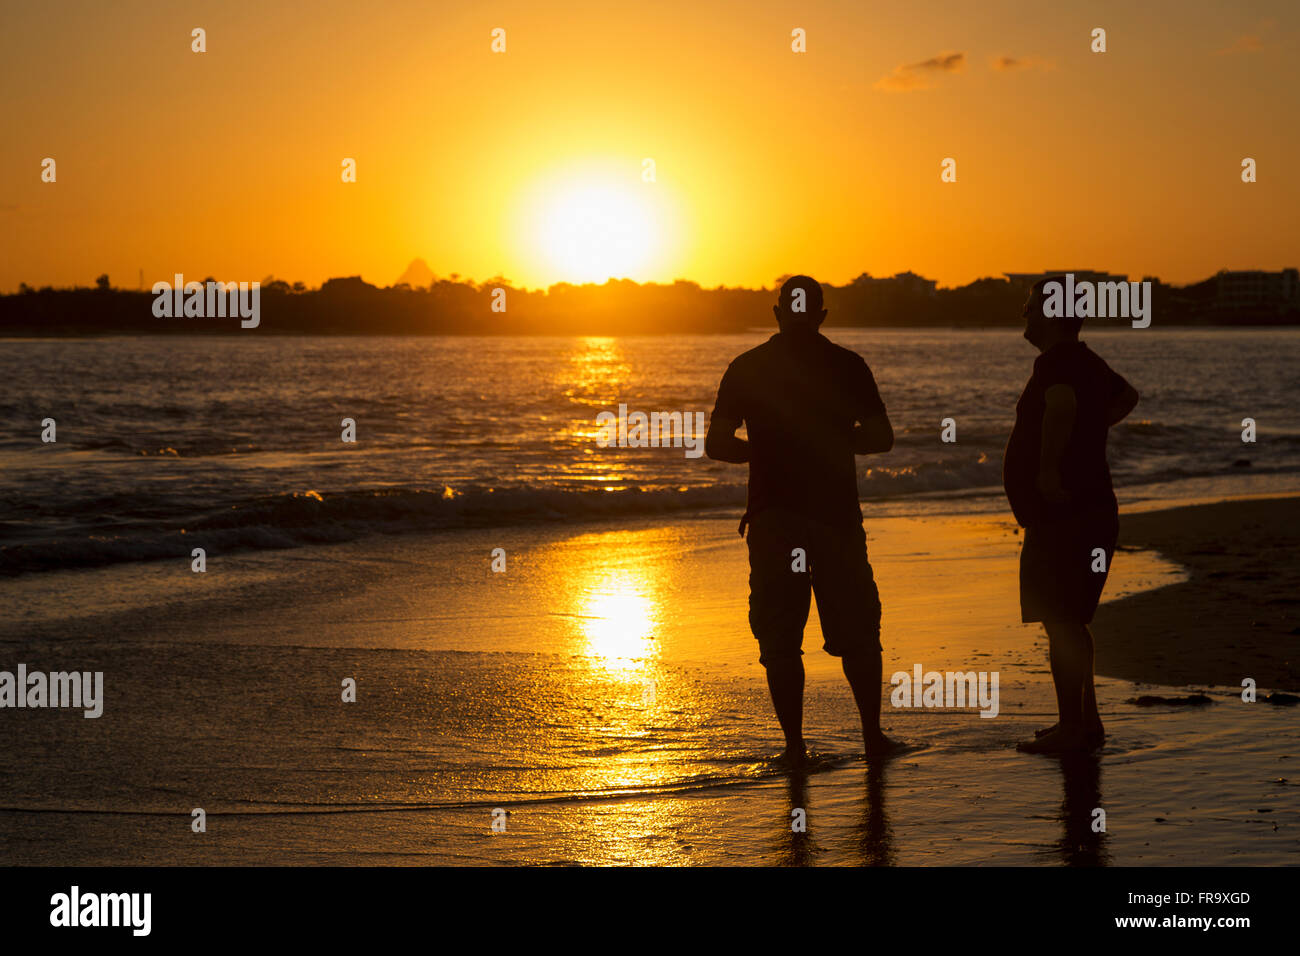 Two men stand in the tide water on a beach at sunset; Caloundra, Queensland, Australia Stock Photo